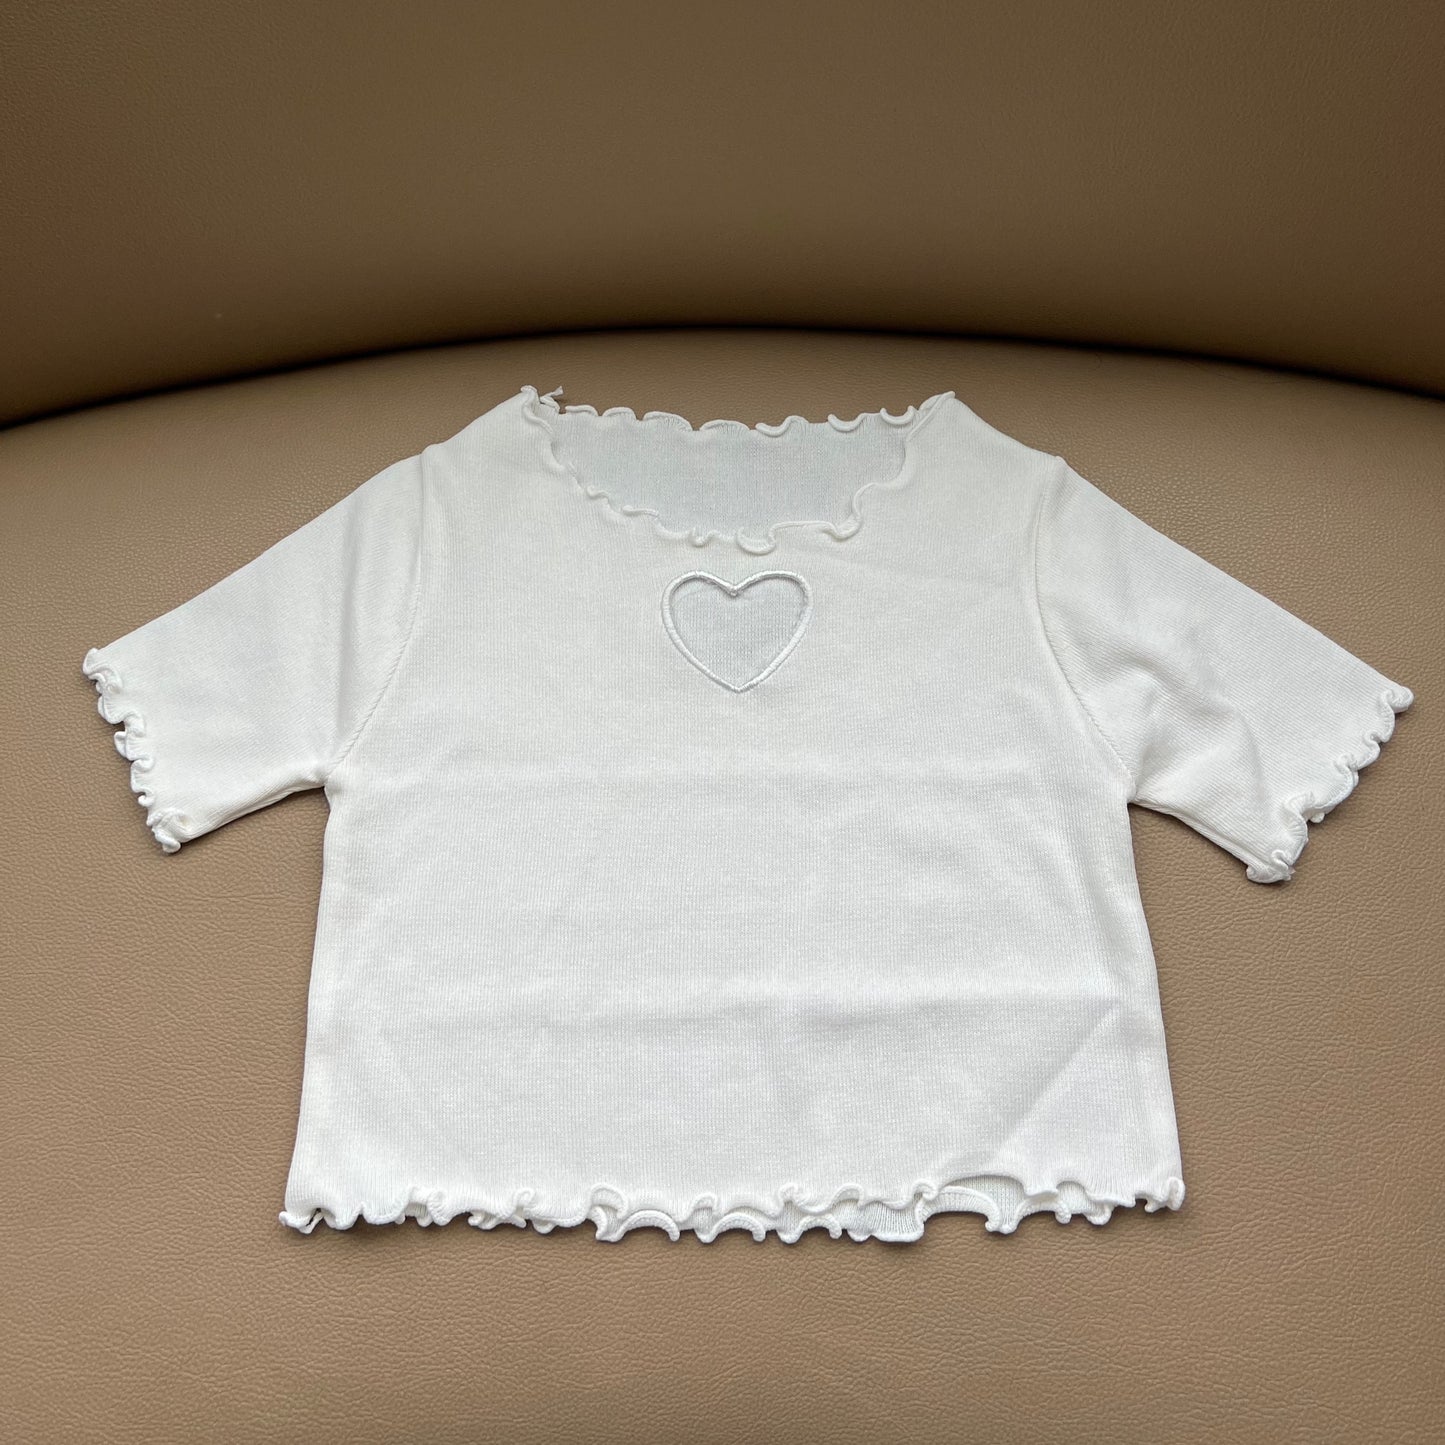 90s Cut Out Heart Tee